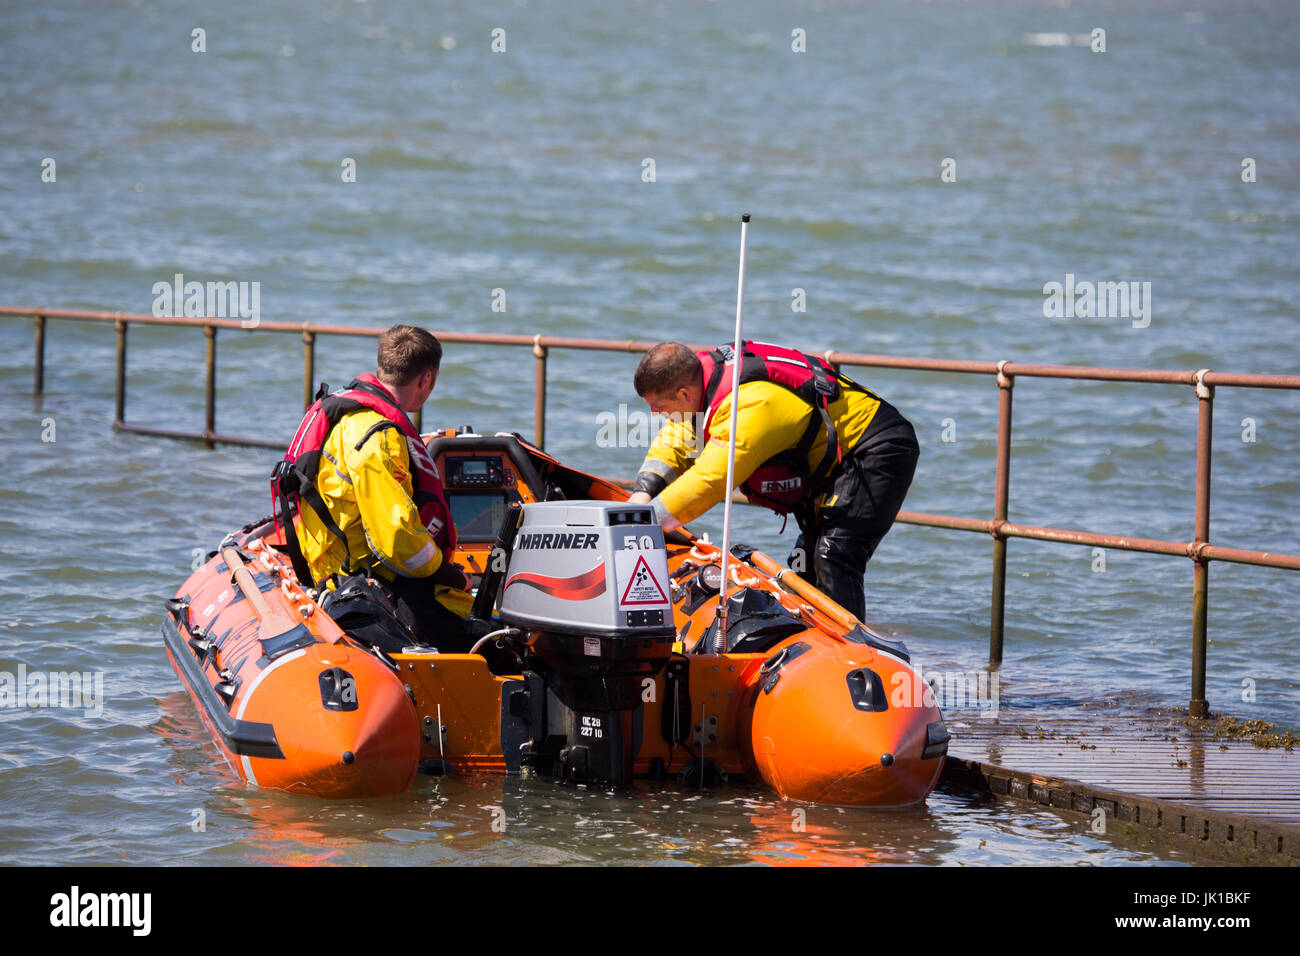 An RLNI inshore rescue boat preparing for launch during a training exercise Stock Photo